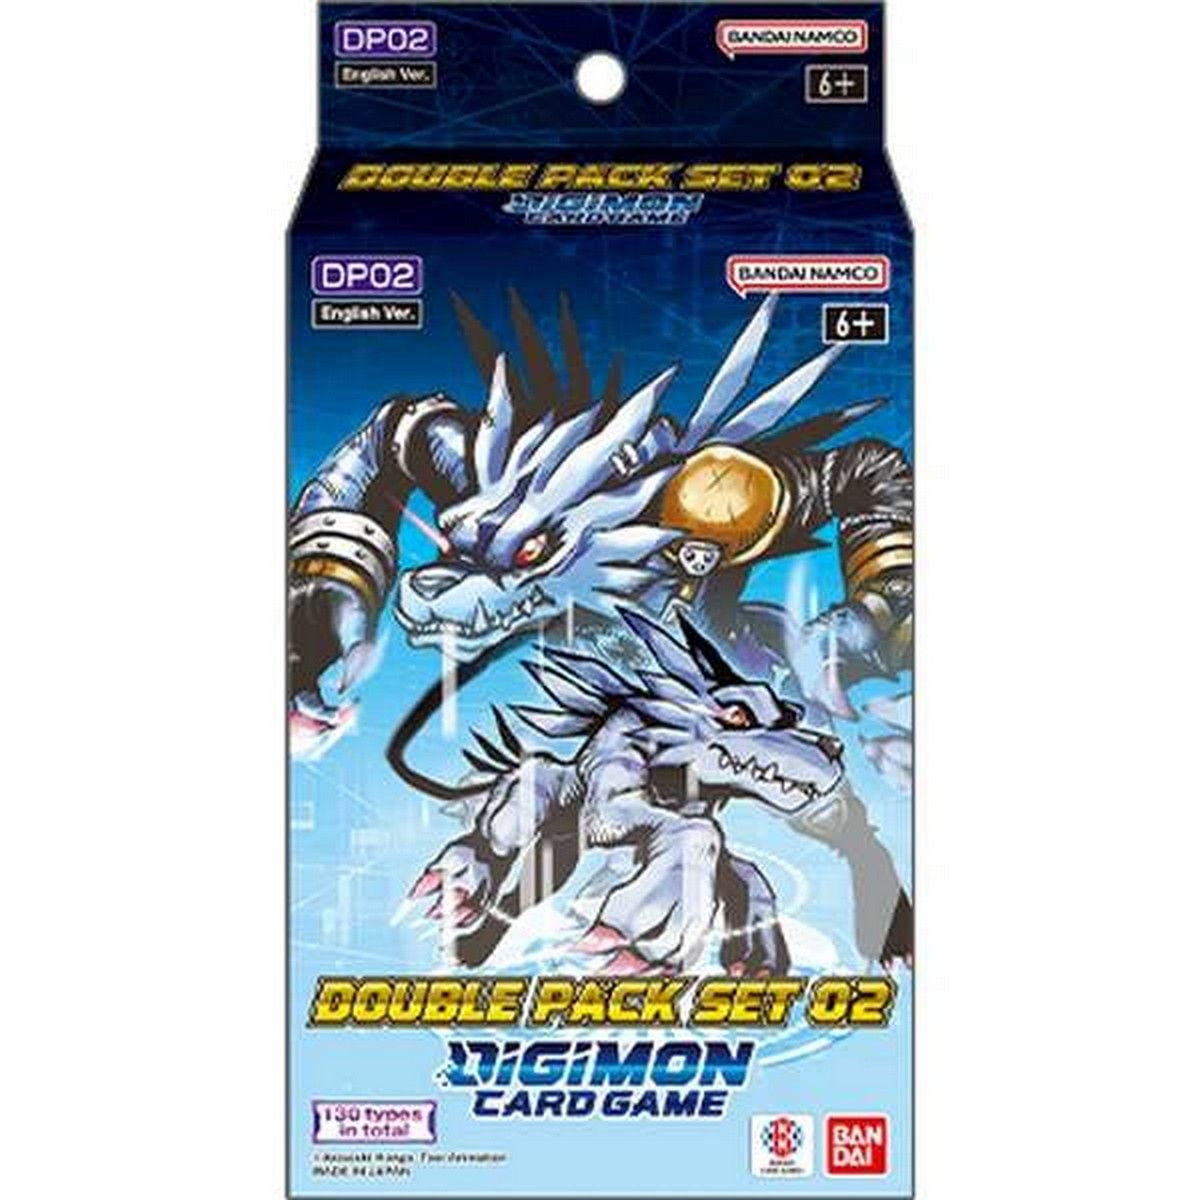 Digimon Card Game: Double Pack Set 02 (DP02)